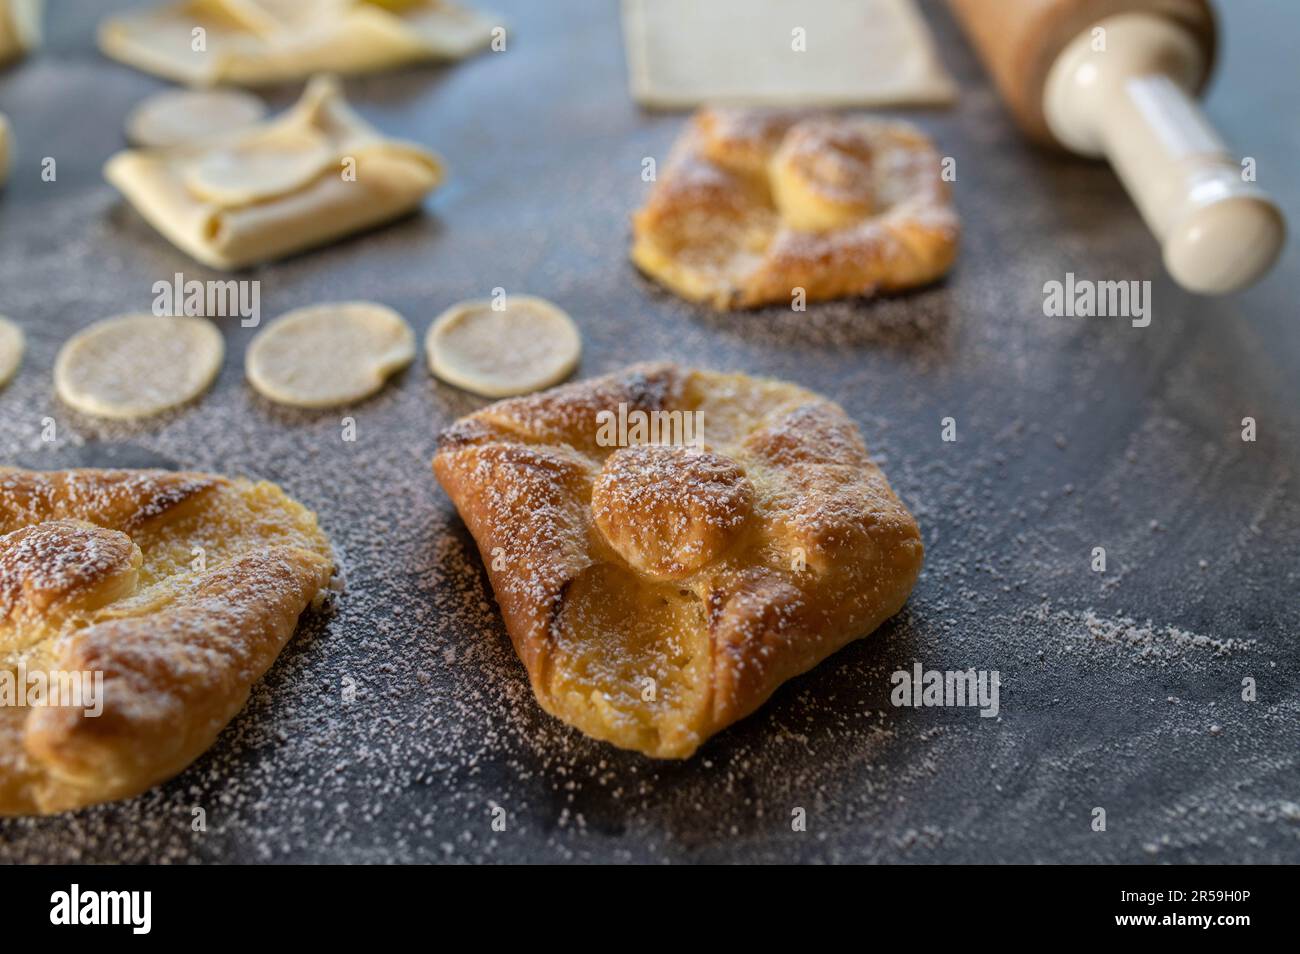 Baked and unbaked puff pastry. Baking preparation Stock Photo